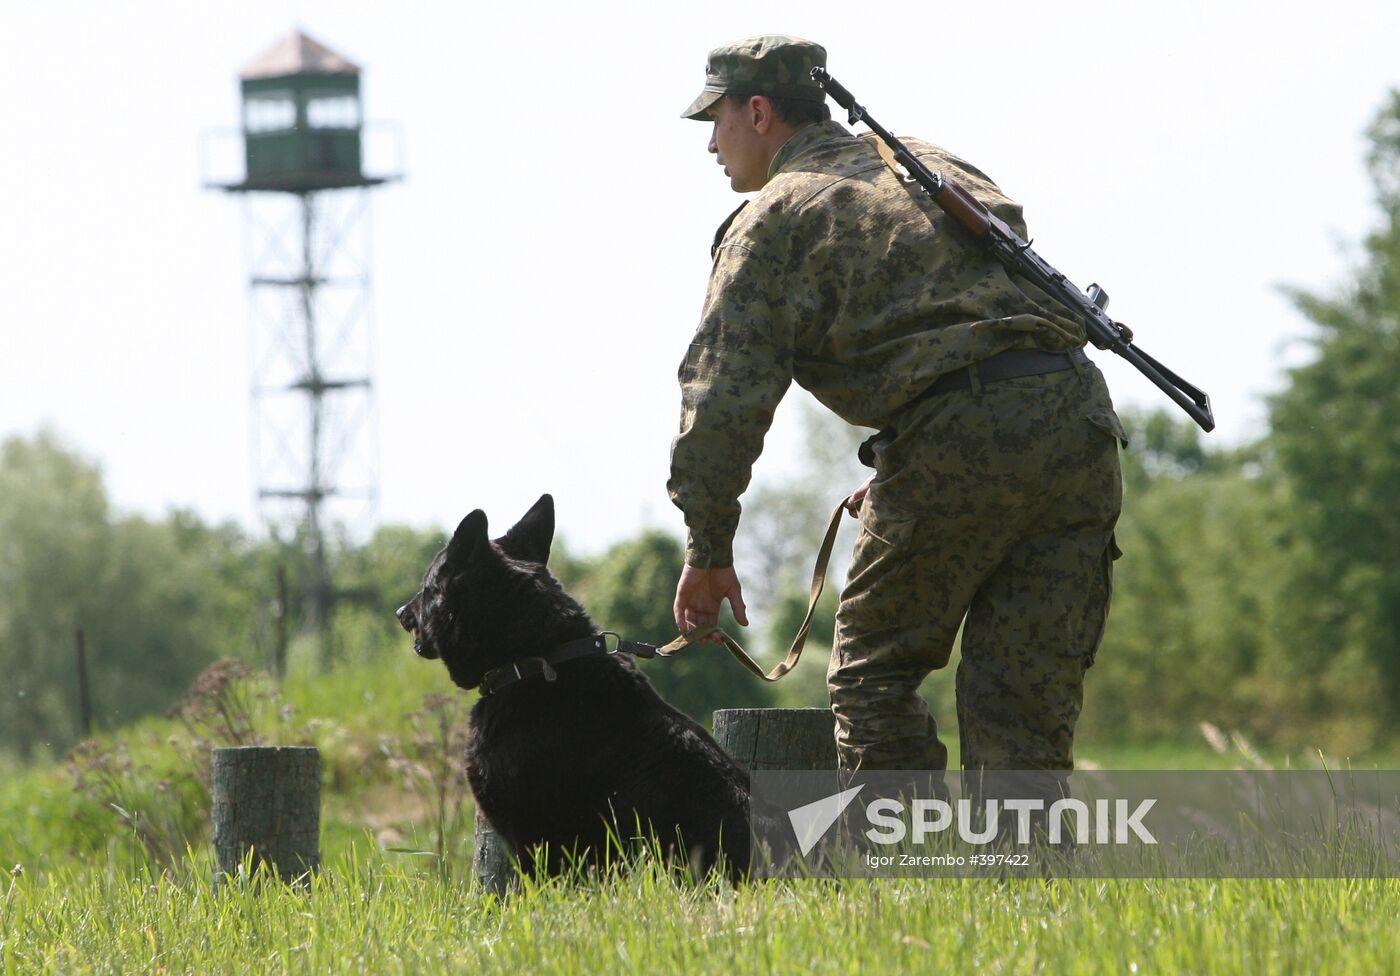 Competitions of canine teams of FSB Border Department